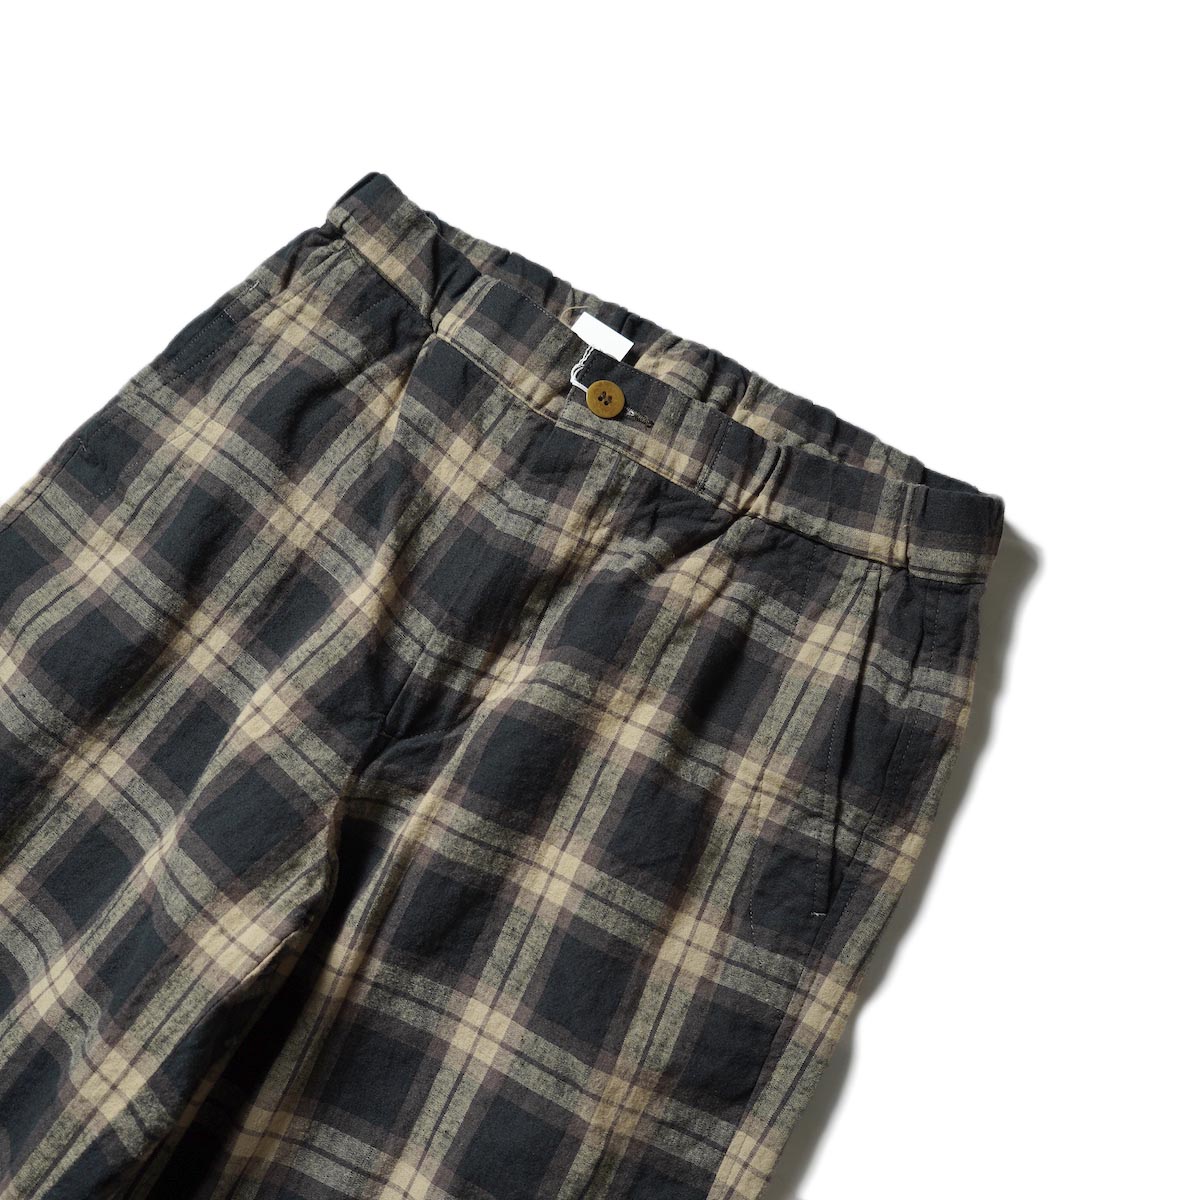 BRENA / Coq Pants - Linen Cotton French Work Chk (Brown Watch)ウエスト